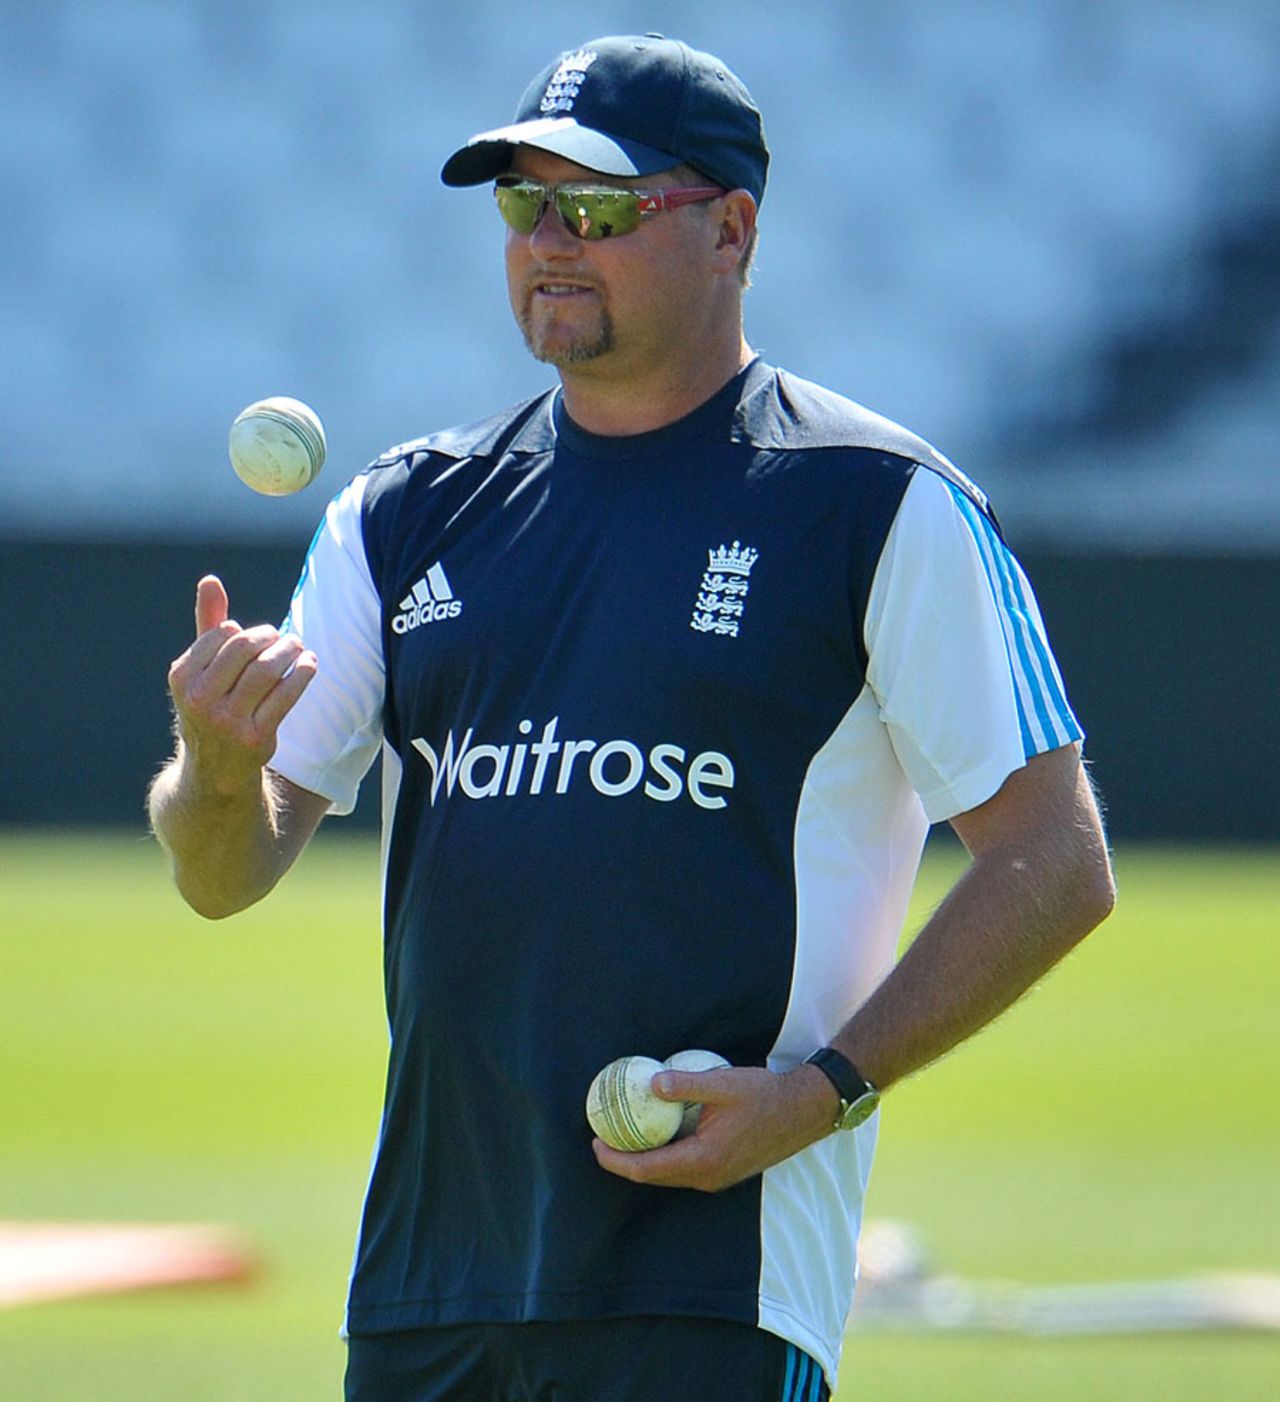 The England fast bowling coach David Saker, The Oval, May 18, 2014